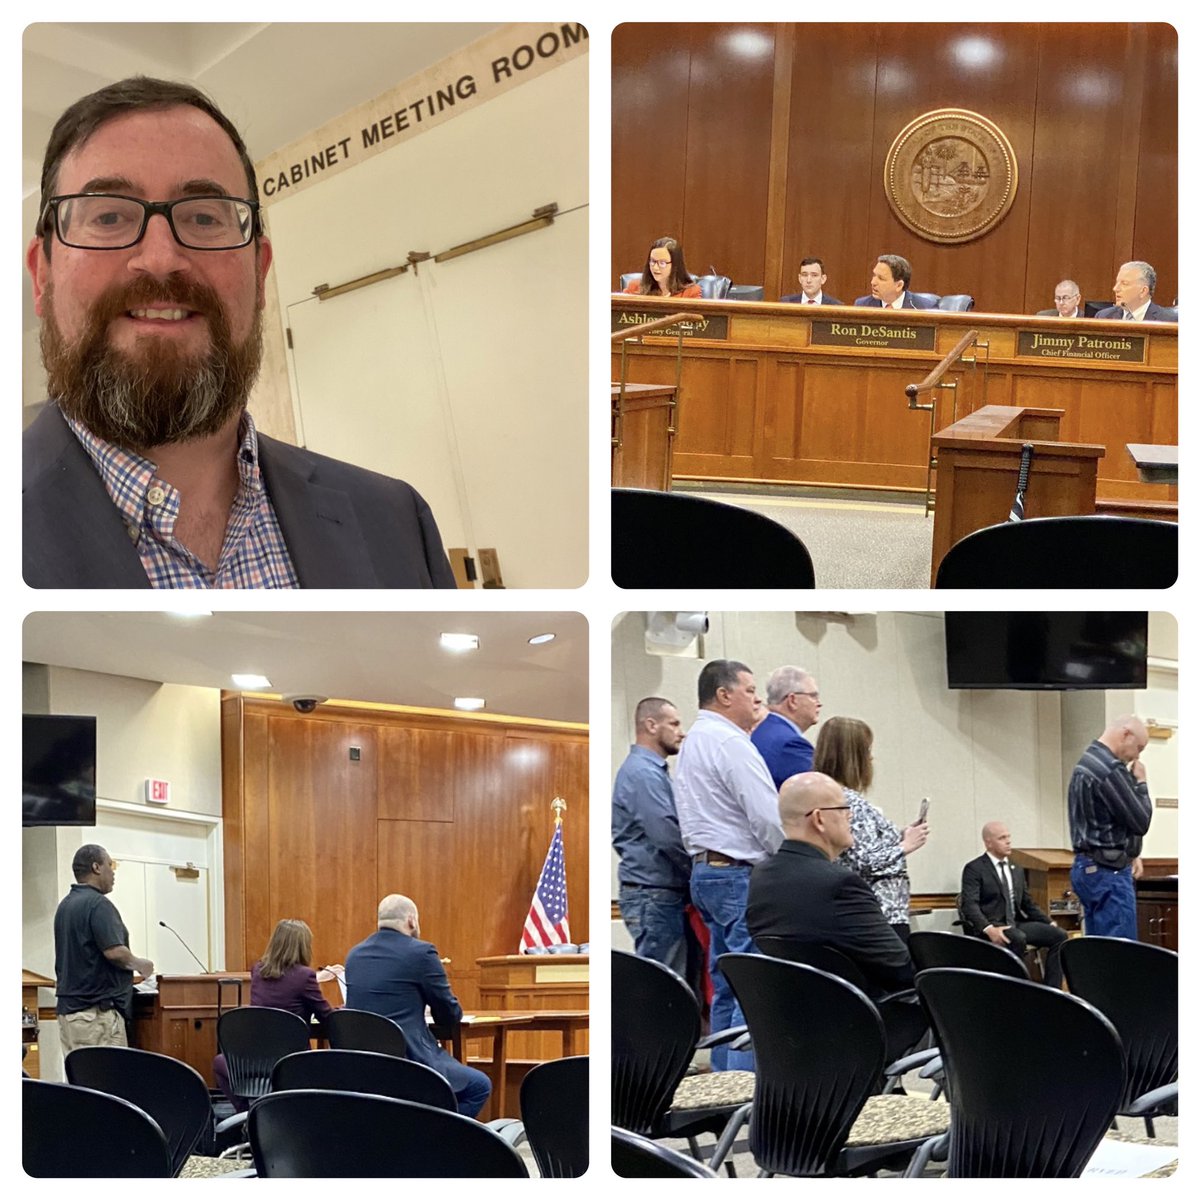 I get emotional during clemency hearings. Today was no exception. It’s life-affirming to see people/families step forward into a new life. Dozens did that today. And I am grateful. Yet I know we can do much more to improve lives and communities through clemency. @FLRightsRestore